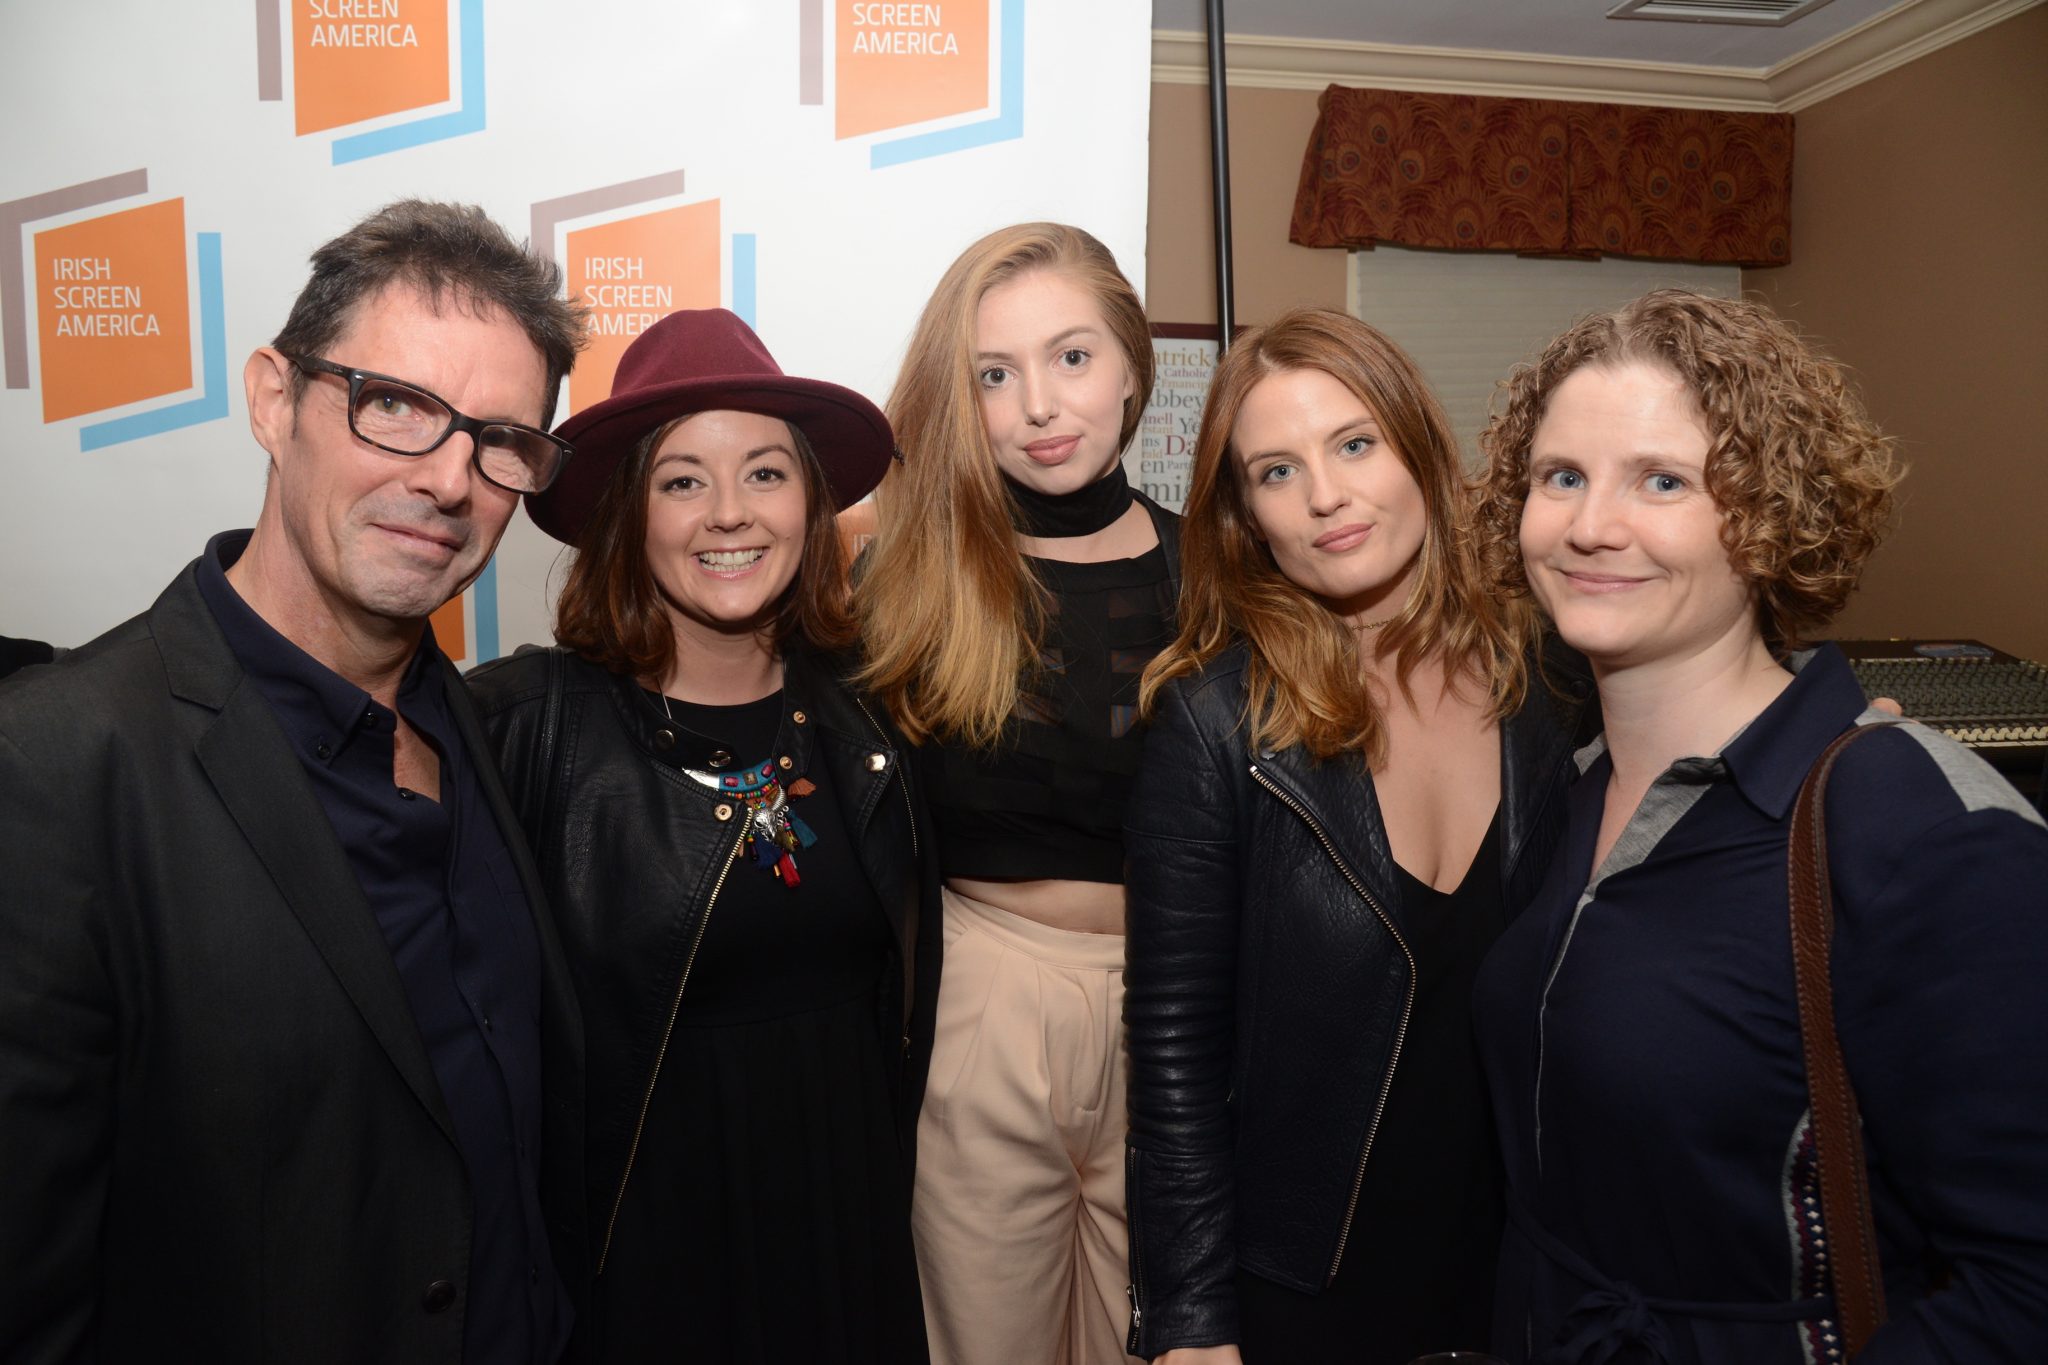 L to R: ISA Director Niall McKay with cast and crew of Can’t Cope Won’t Cope - director Cathy Brady, star Seana Kerslake, star Nika McGuigan, producer Ailish McElmeel